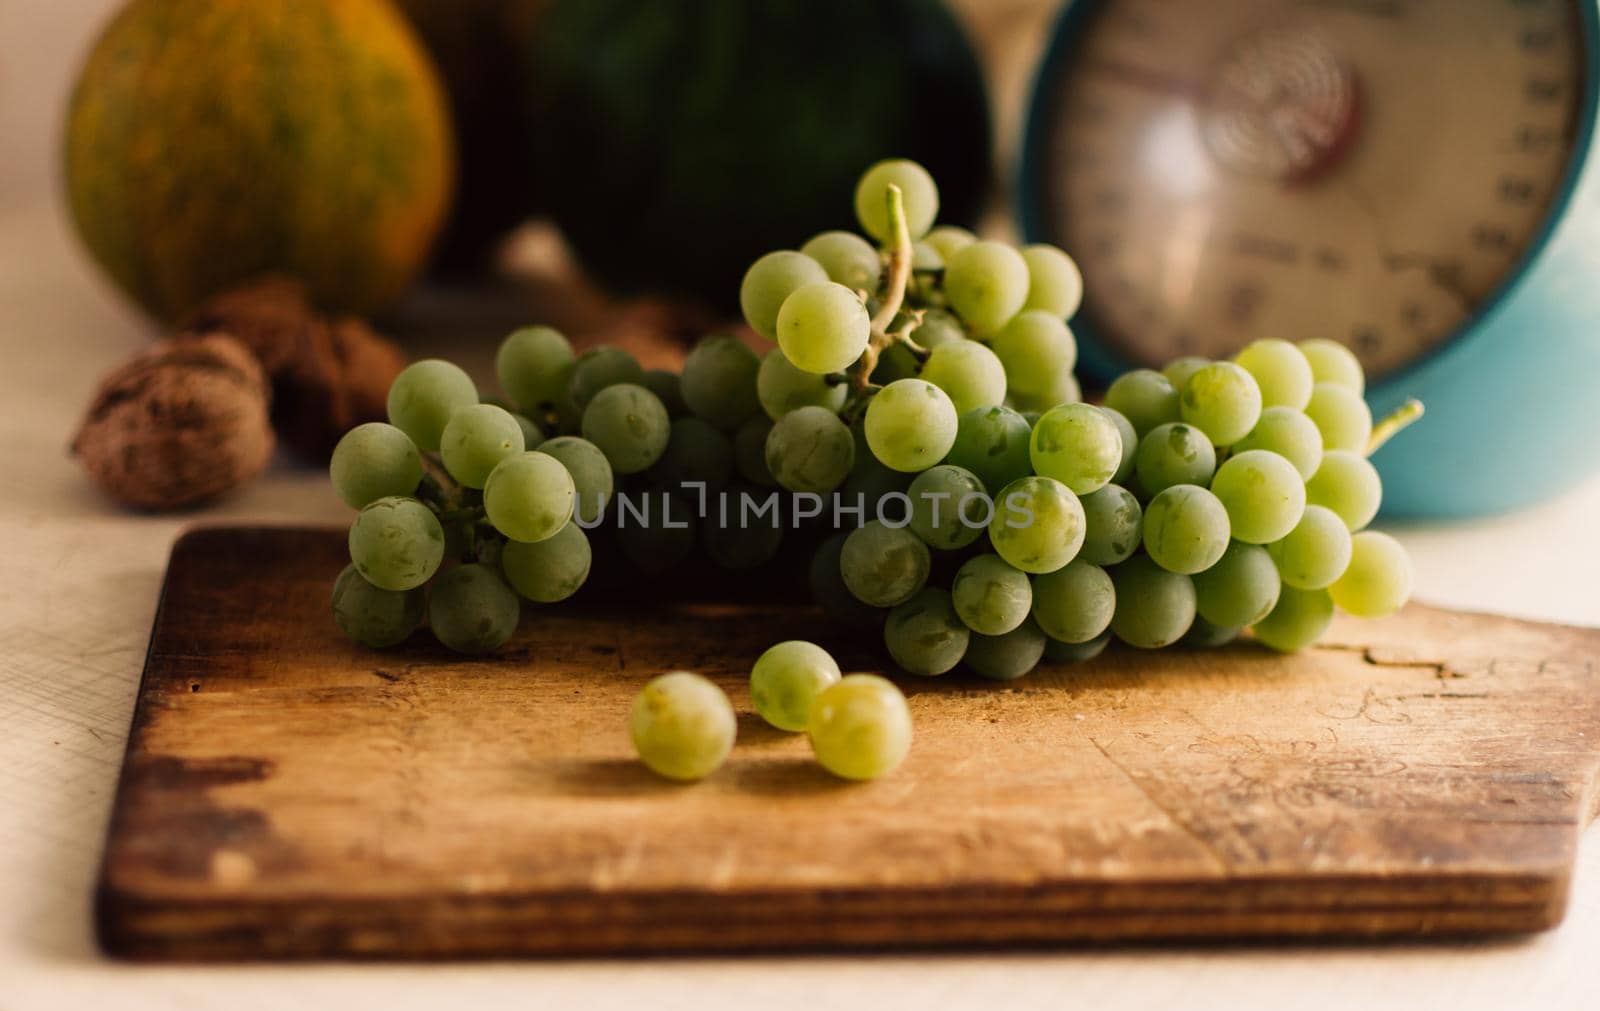 Autumn still life.Green grapes lie on wooden board.In the background are pumpkins,walnuts and scales.Autumn harvest concept.Happy Thanksgiving.Selective focus.Horizontal orientation.